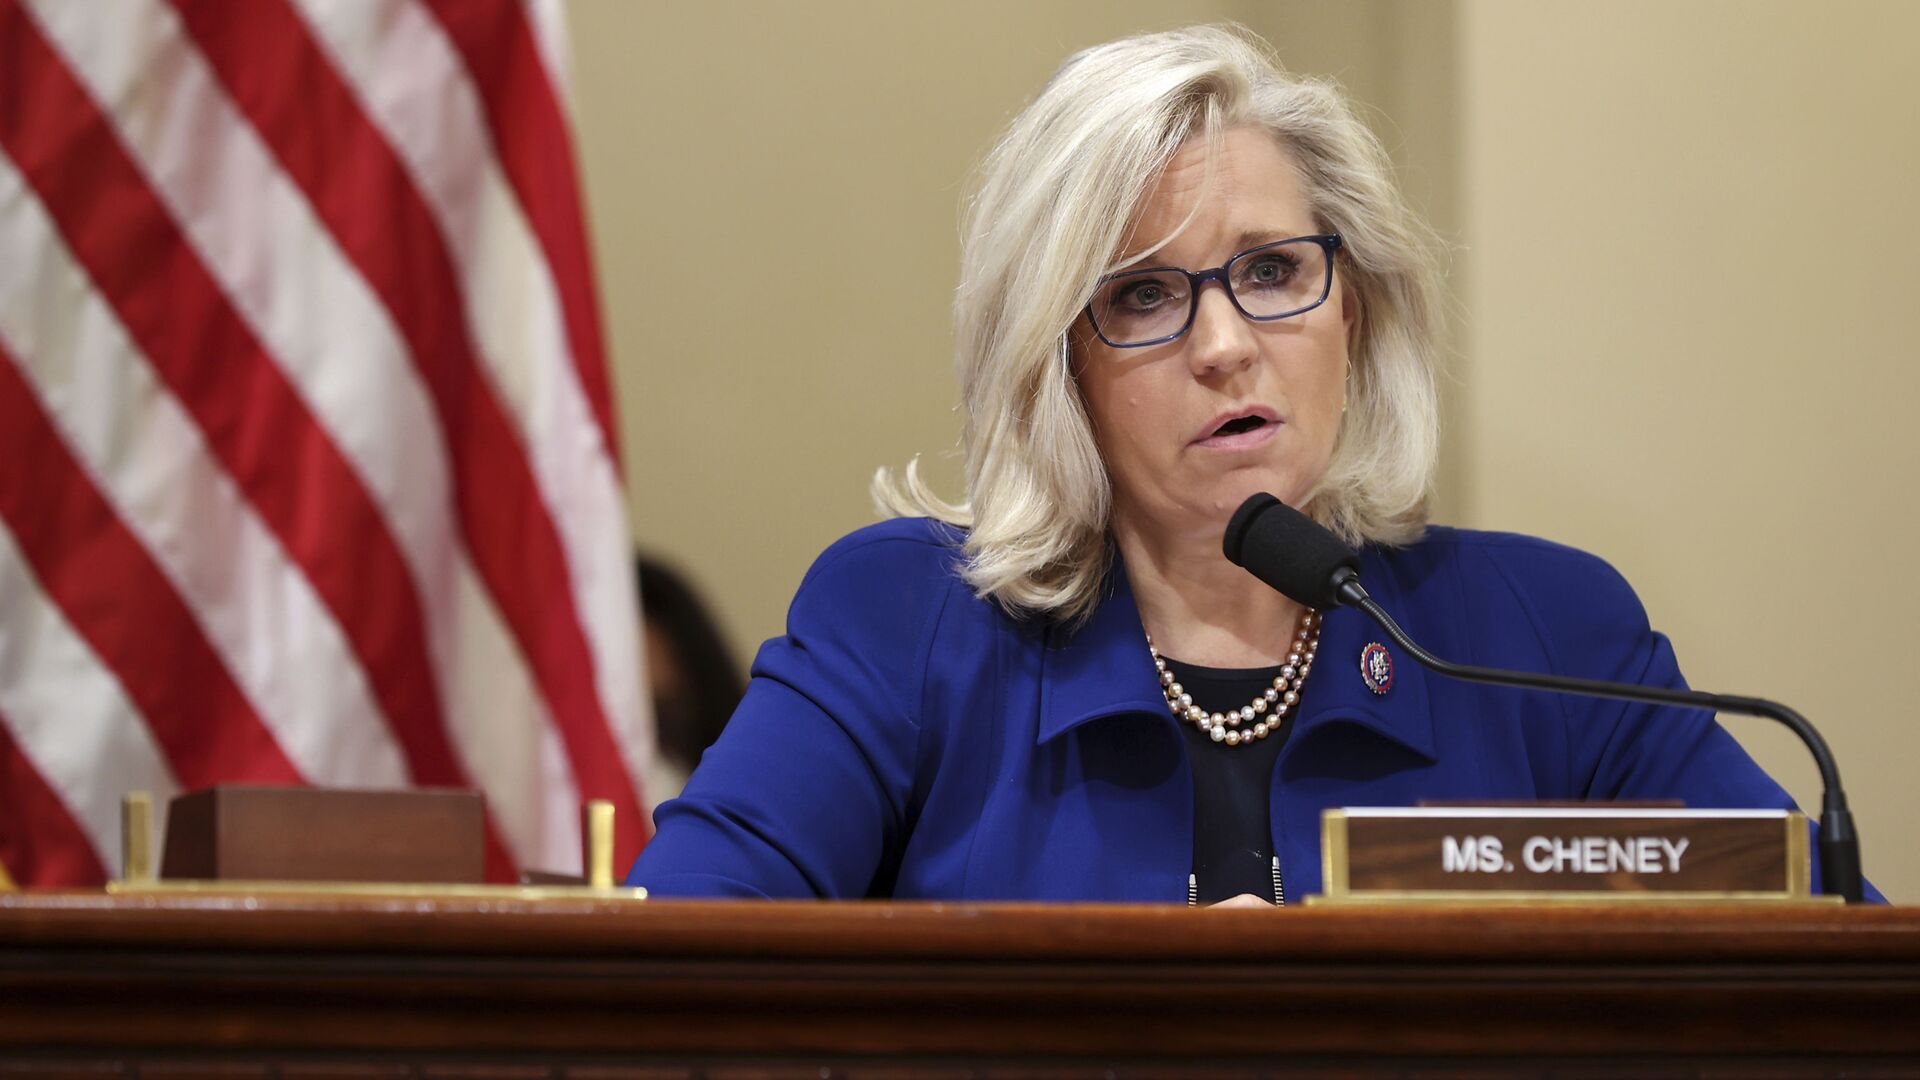 Rep. Liz Cheney, R-Wy., delivers opening remarks at the first hearing of the House select committee hearing on the Jan. 6 attack on Capitol Hill in Washington, Tuesday, July 27, 2021. - Sputnik International, 1920, 04.07.2022